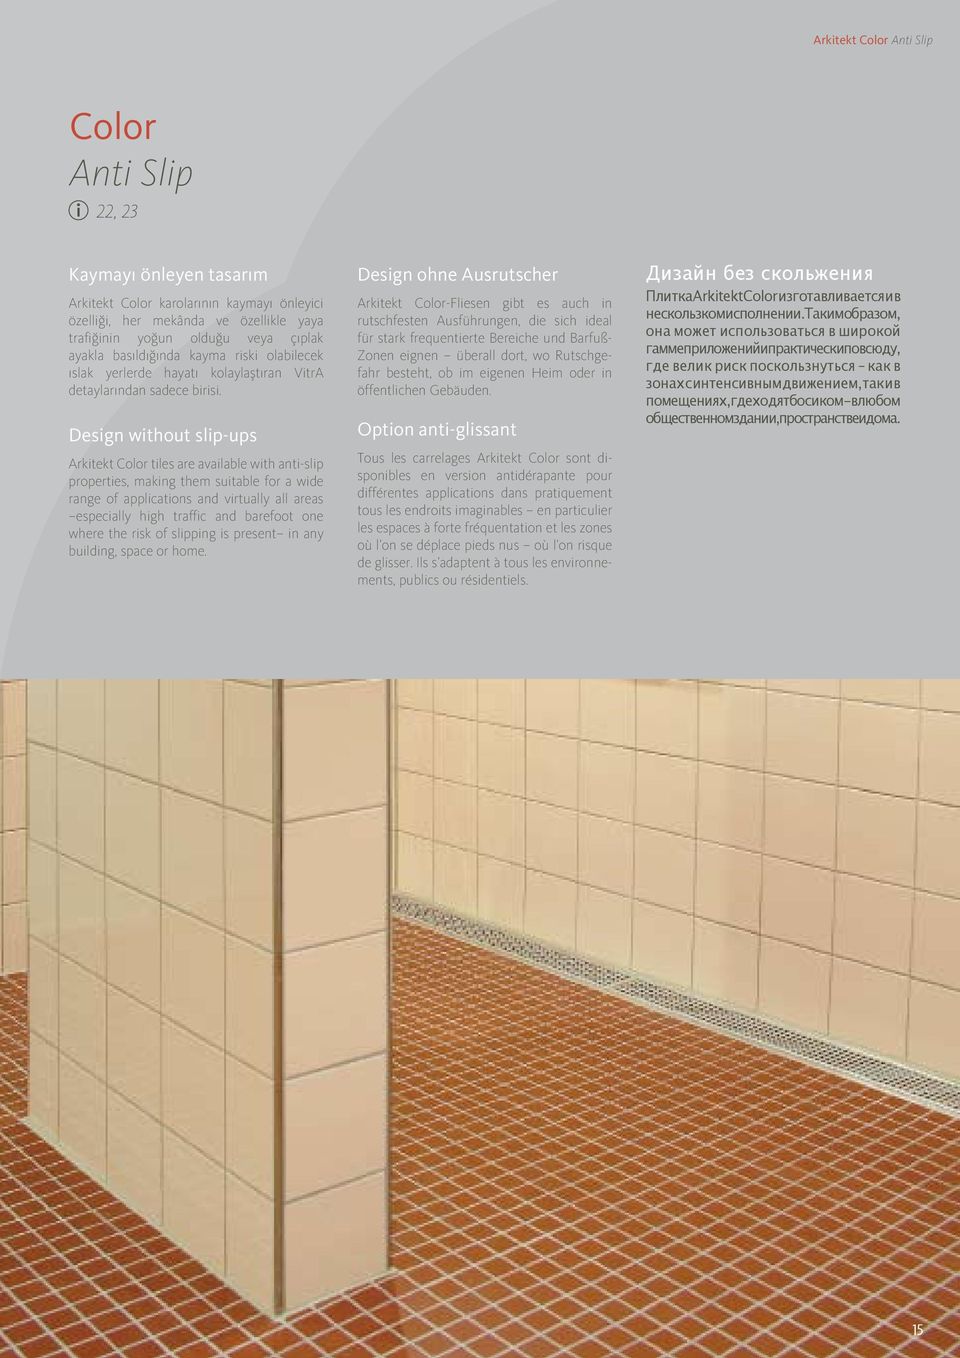 Design without slip-ups Arkitekt Color tiles are available with anti-slip properties, making them suitable for a wide range of applications and virtually all areas especially high traffic and